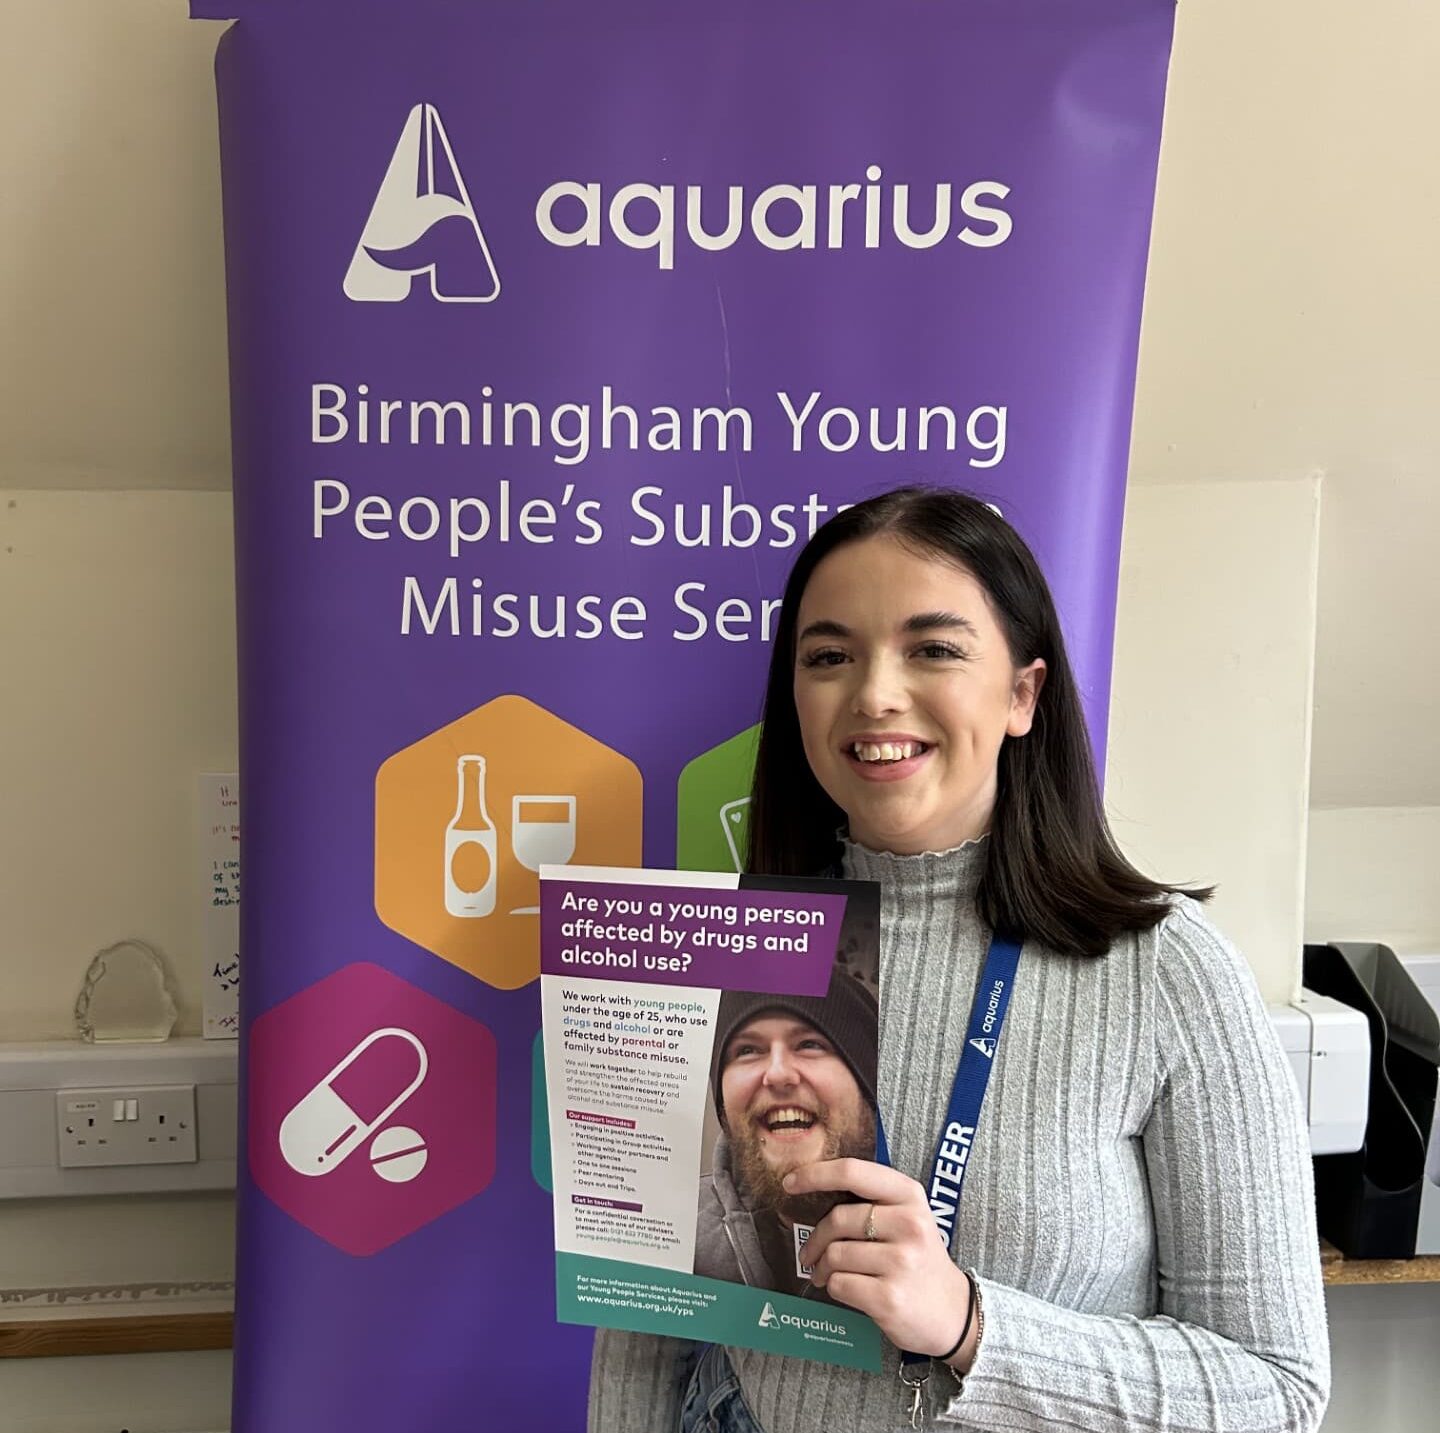 Holly Lewis posing in front of an Aquarius charity banner